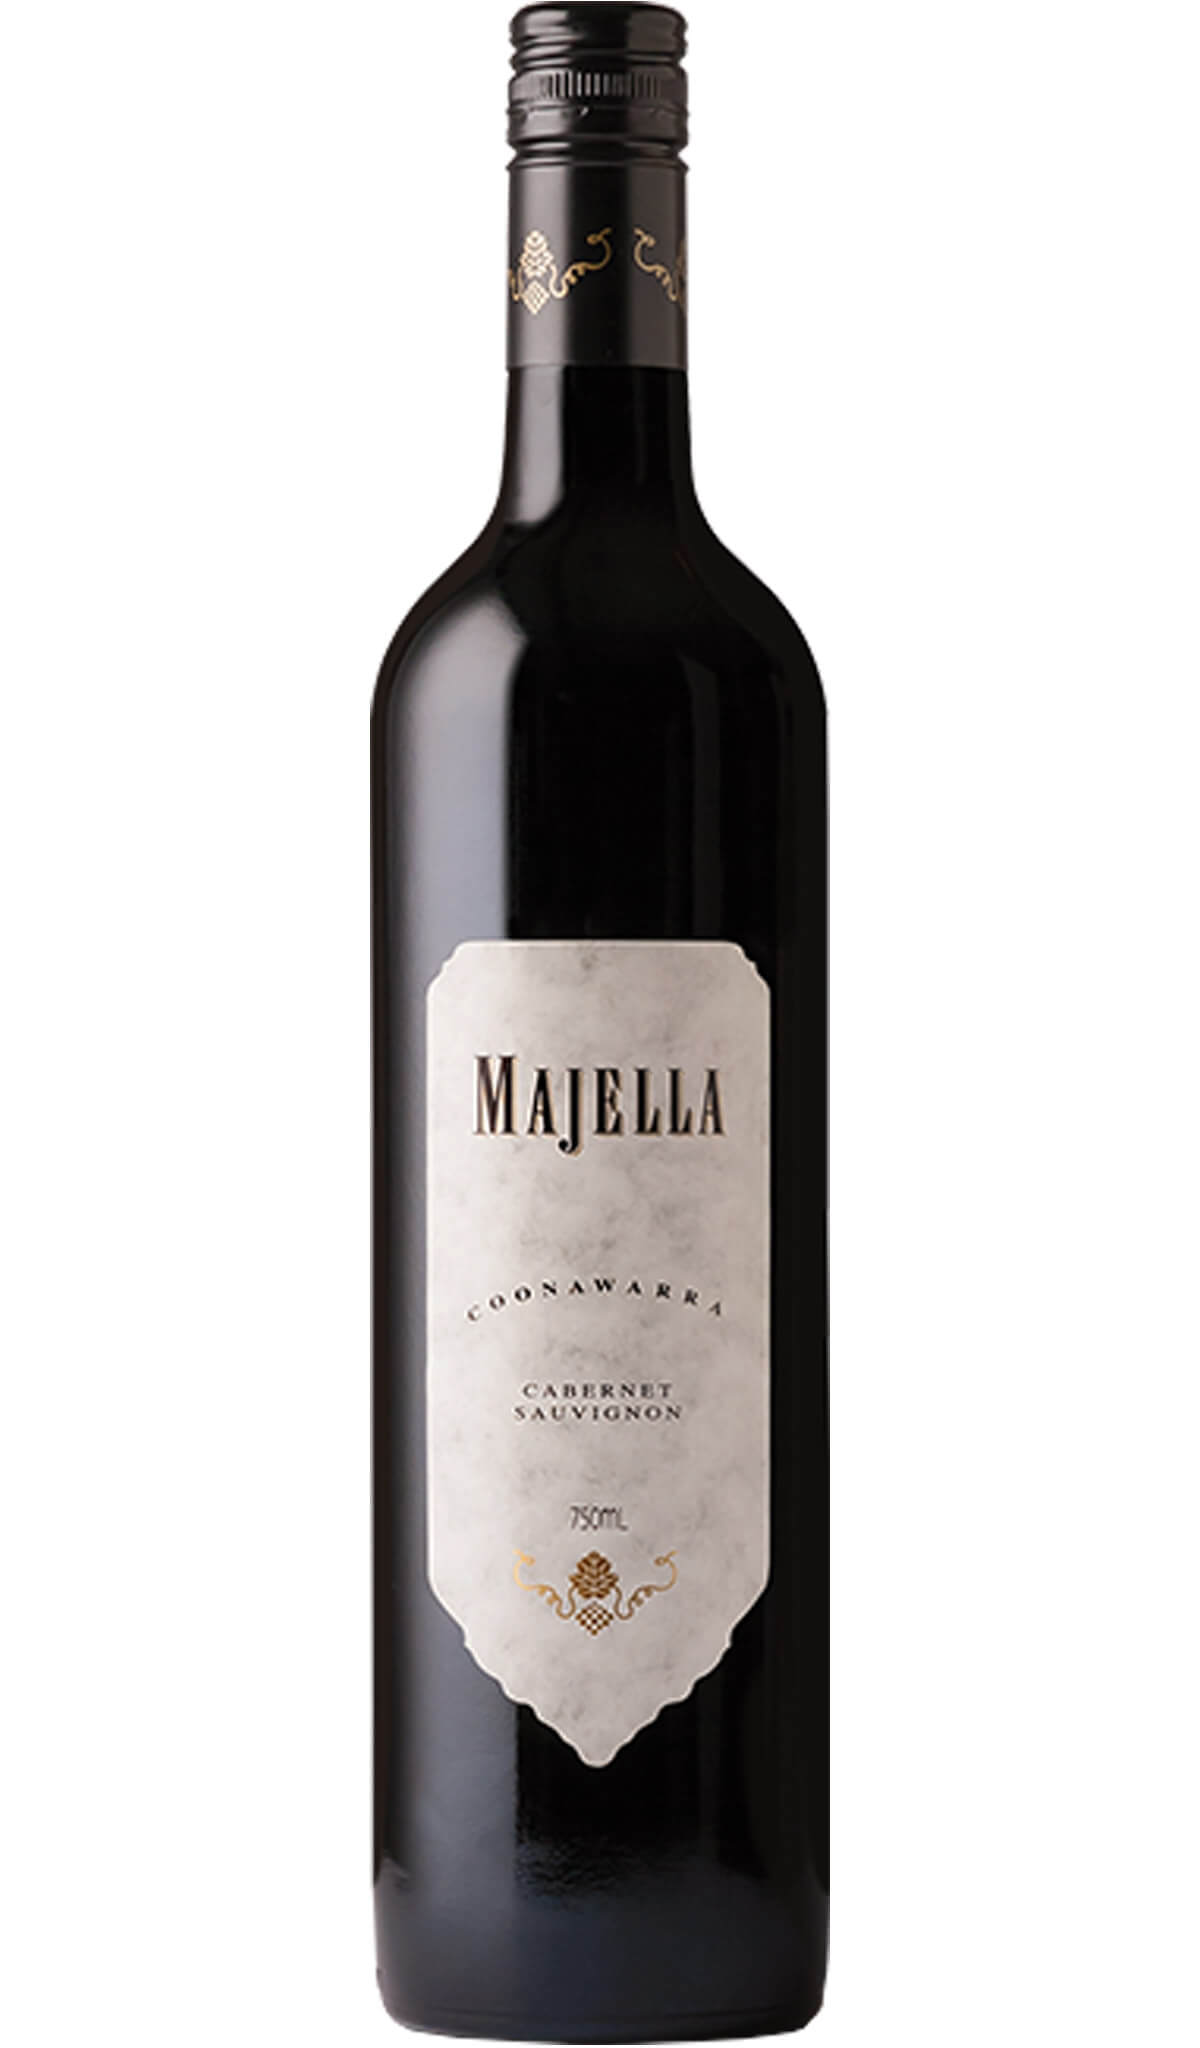 Find out more or buy Majella Coonawarra Cabernet Sauvignon 2021 online at Wine Sellers Direct - Australia’s independent liquor specialists.